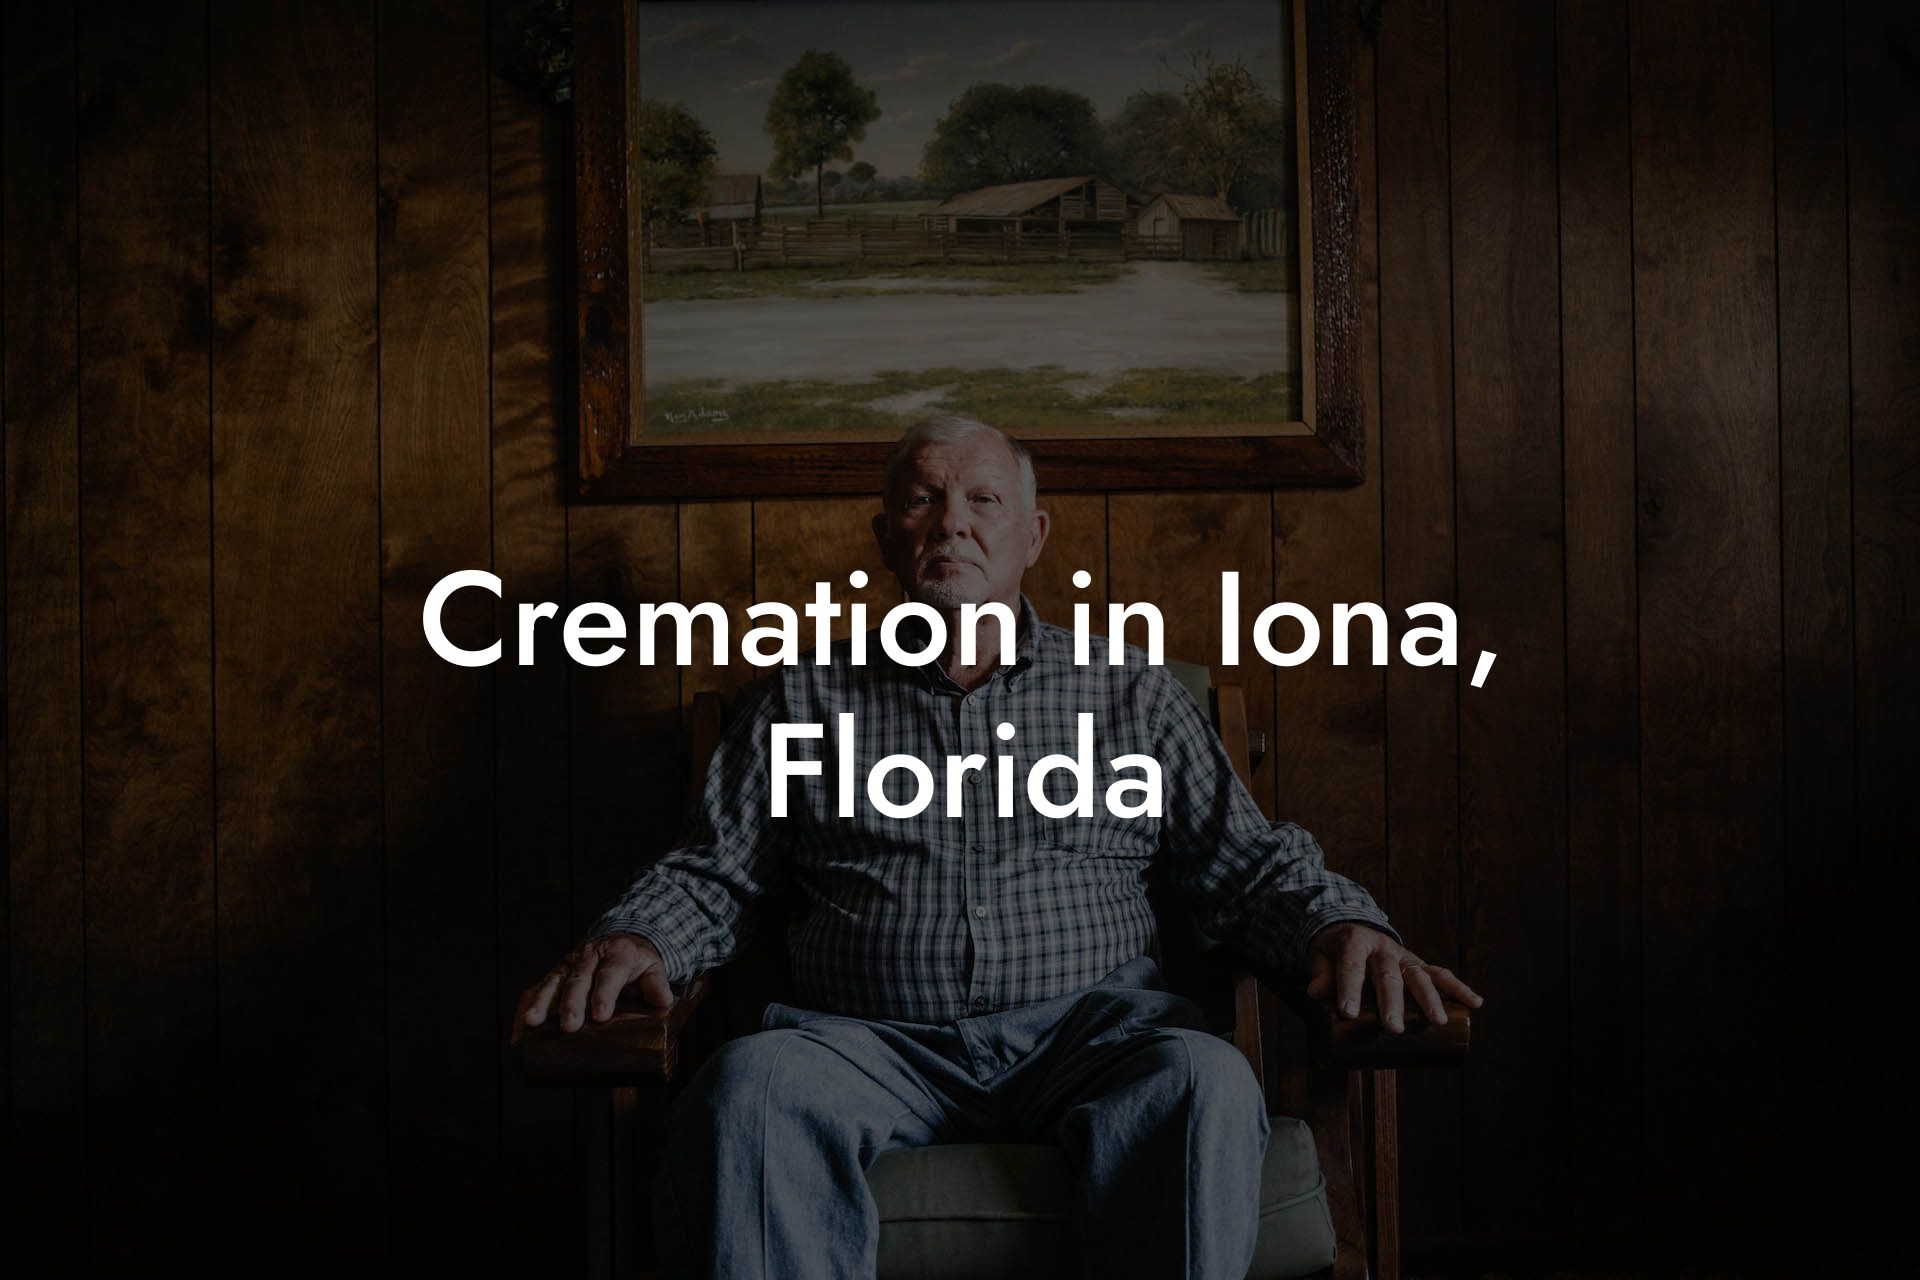 Cremation in Iona, Florida